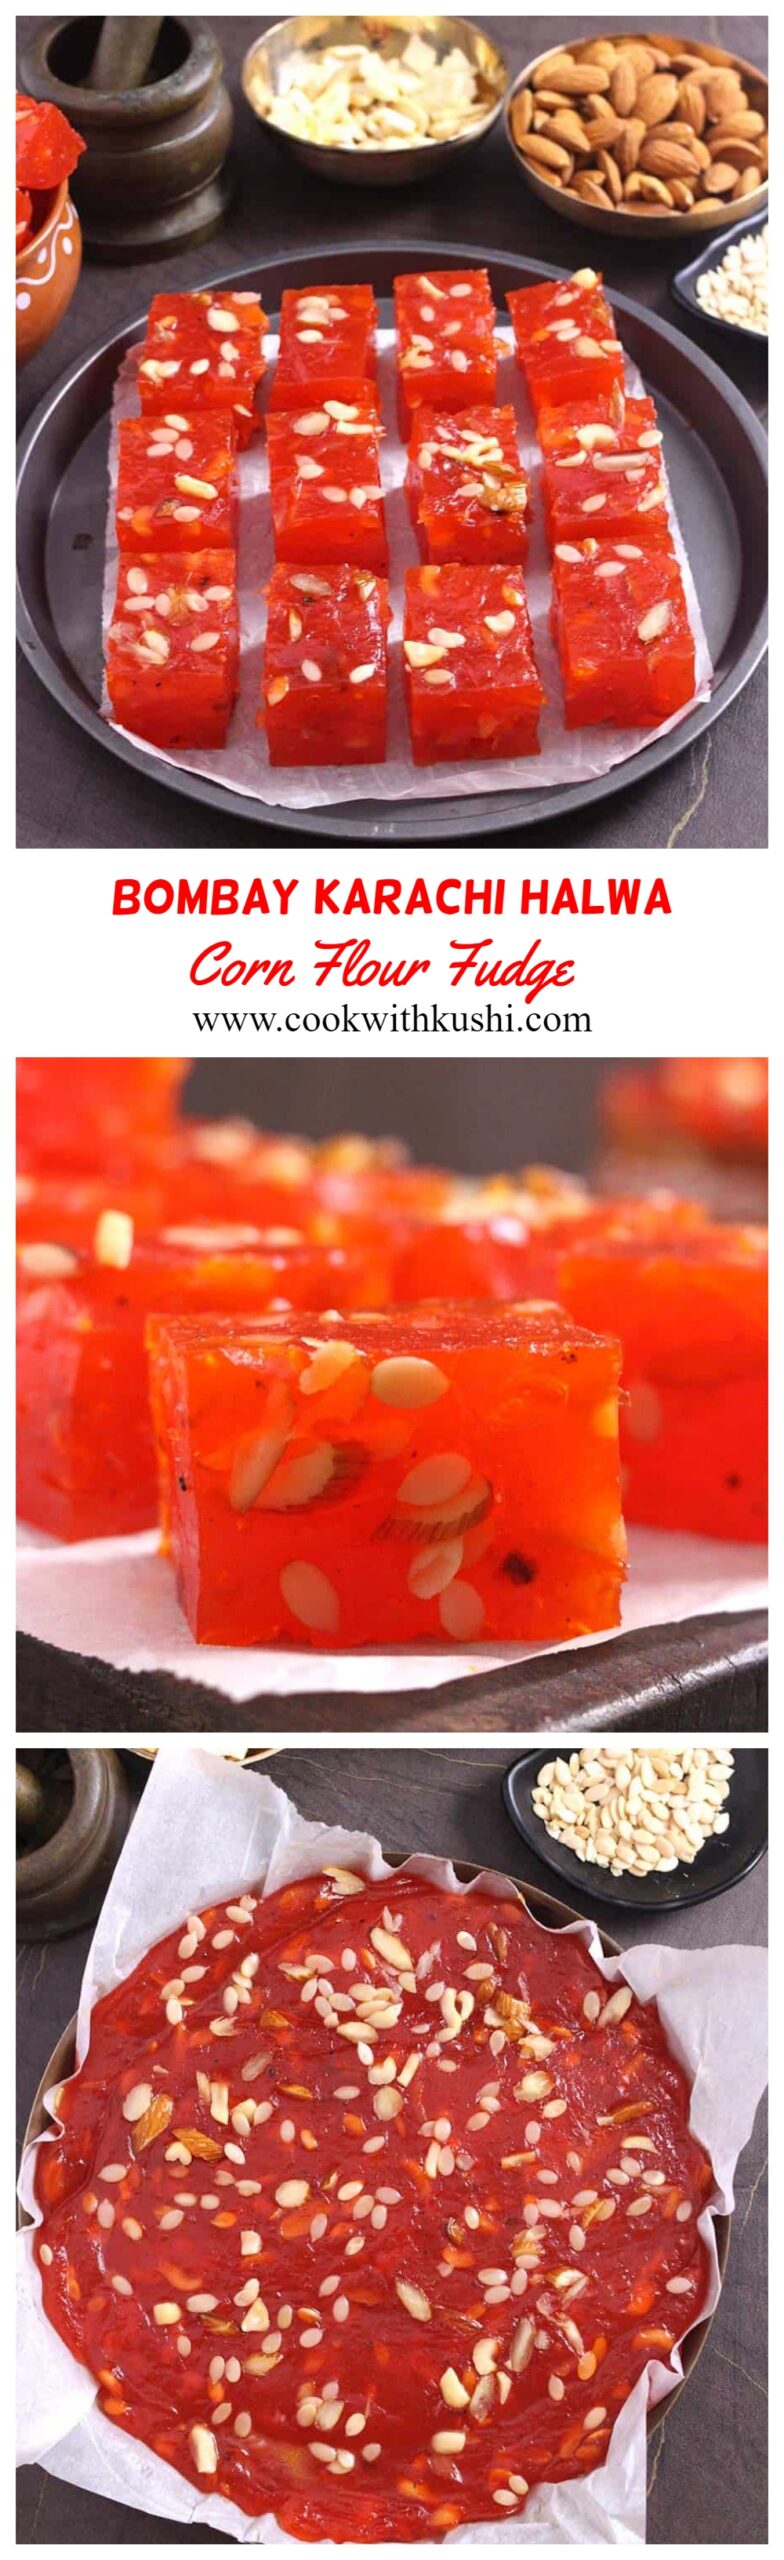 Bombay Halwa or Karachi Halwa is a melt-in-mouth Indian sweet recipe that you should try during this Diwali festival. #halwa #halva #indiansweets #indiandesserts